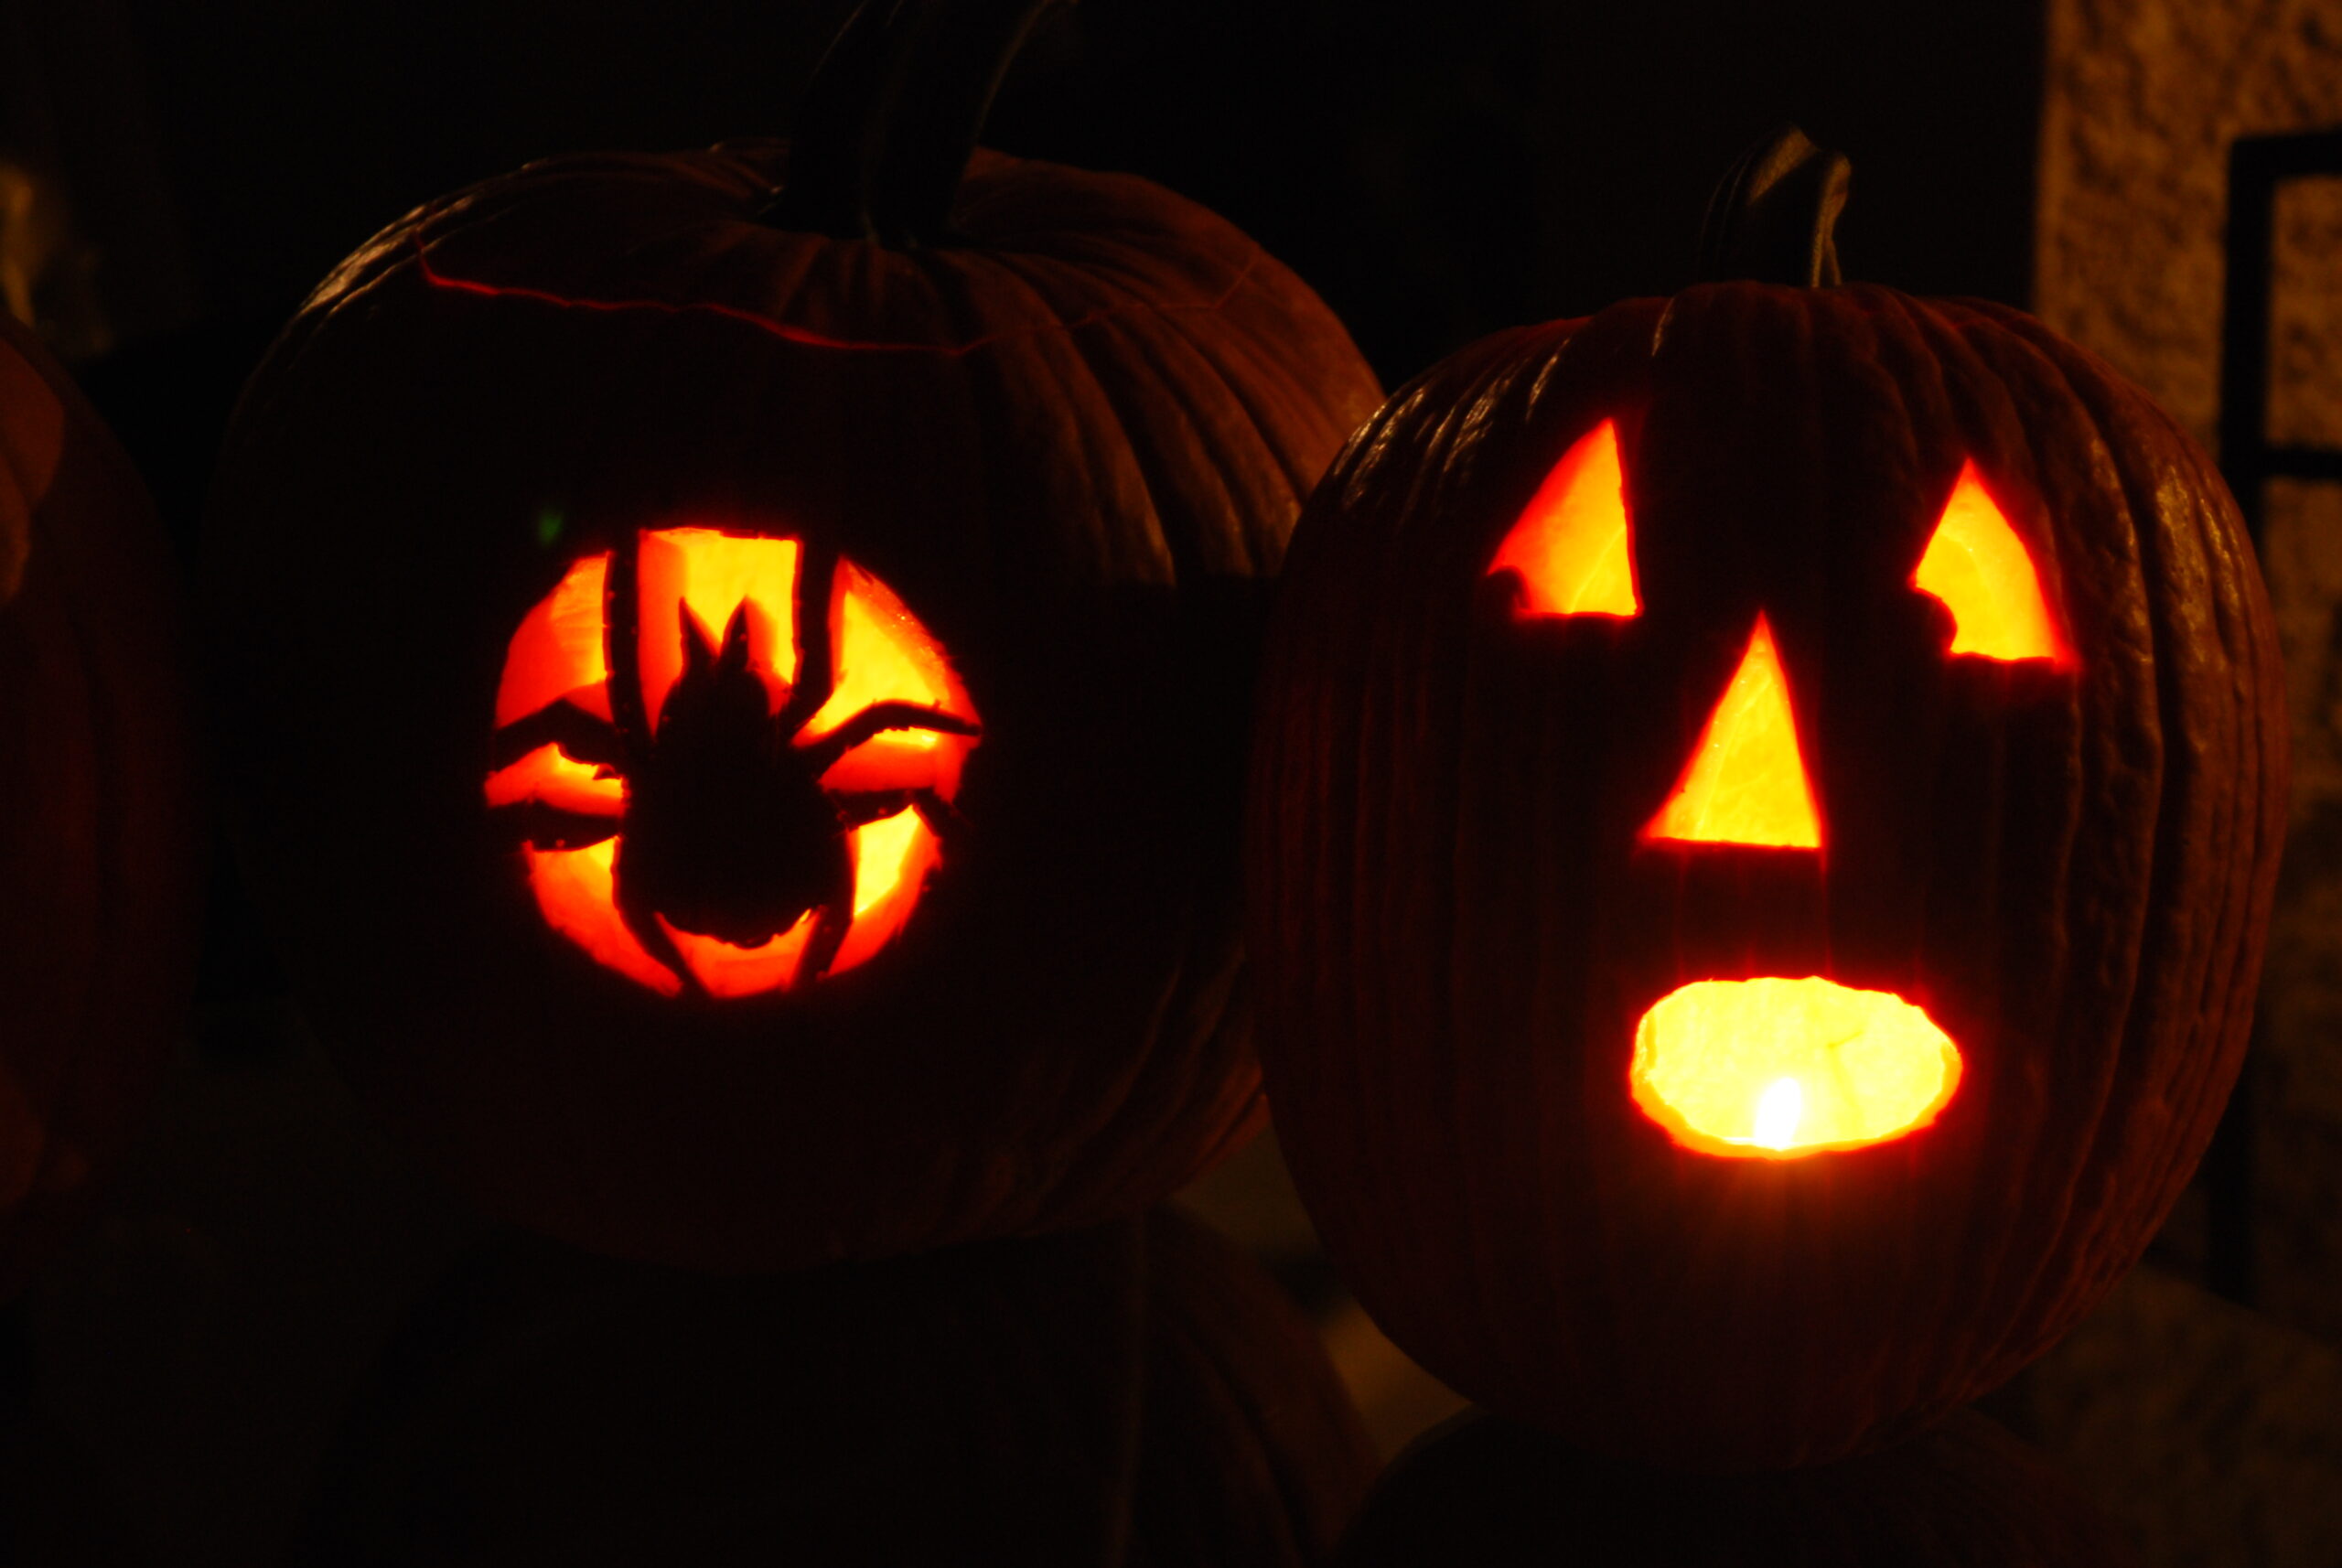 Spider and Frightened Face Carved Into Pumpkins